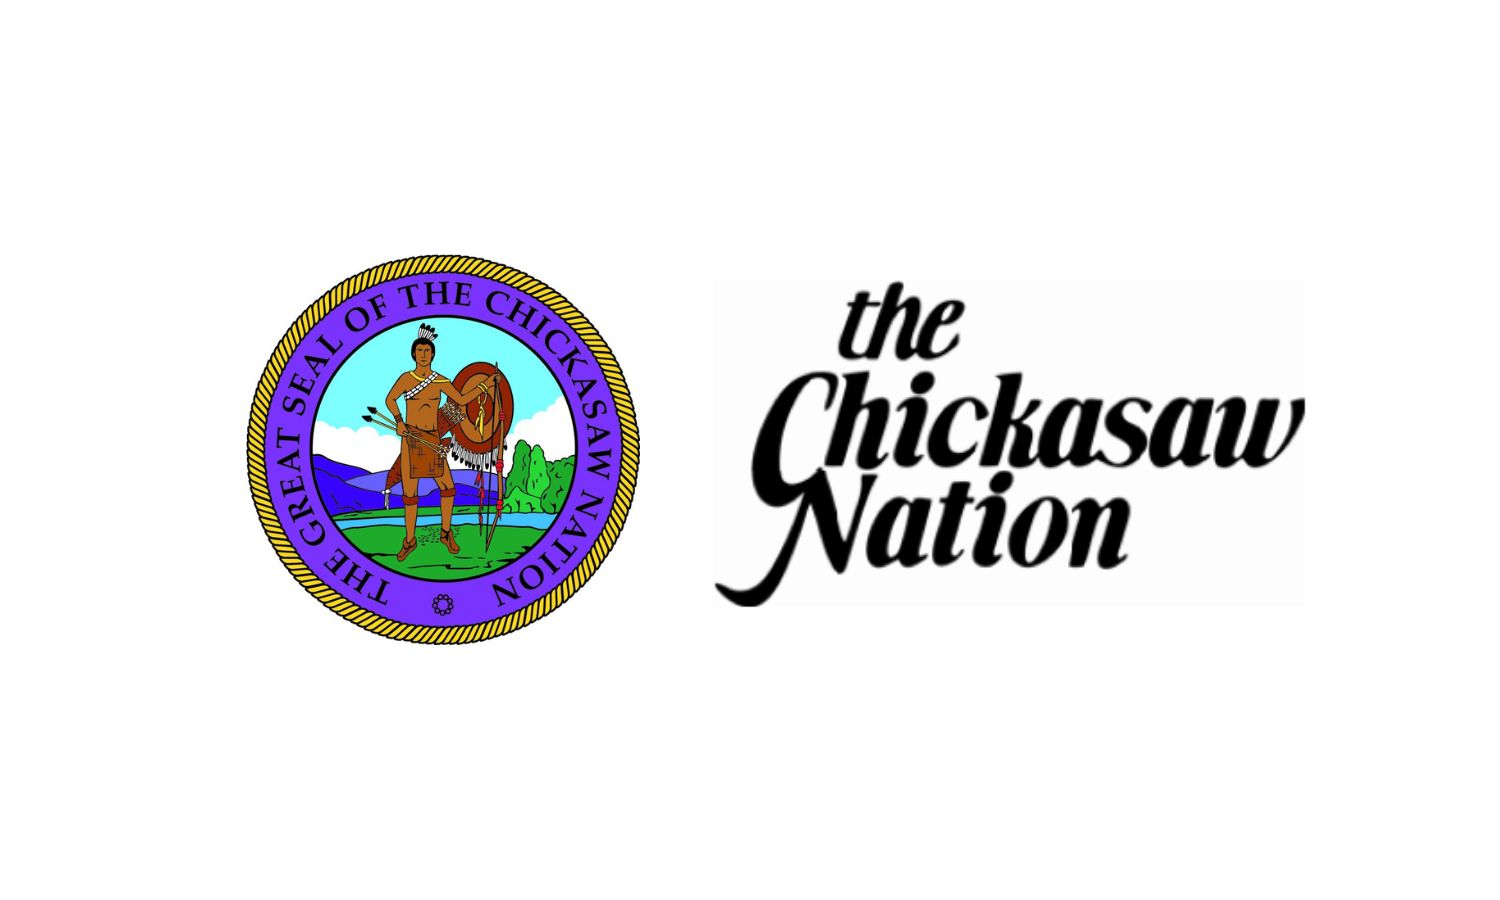 The Chickasaw Nation logo